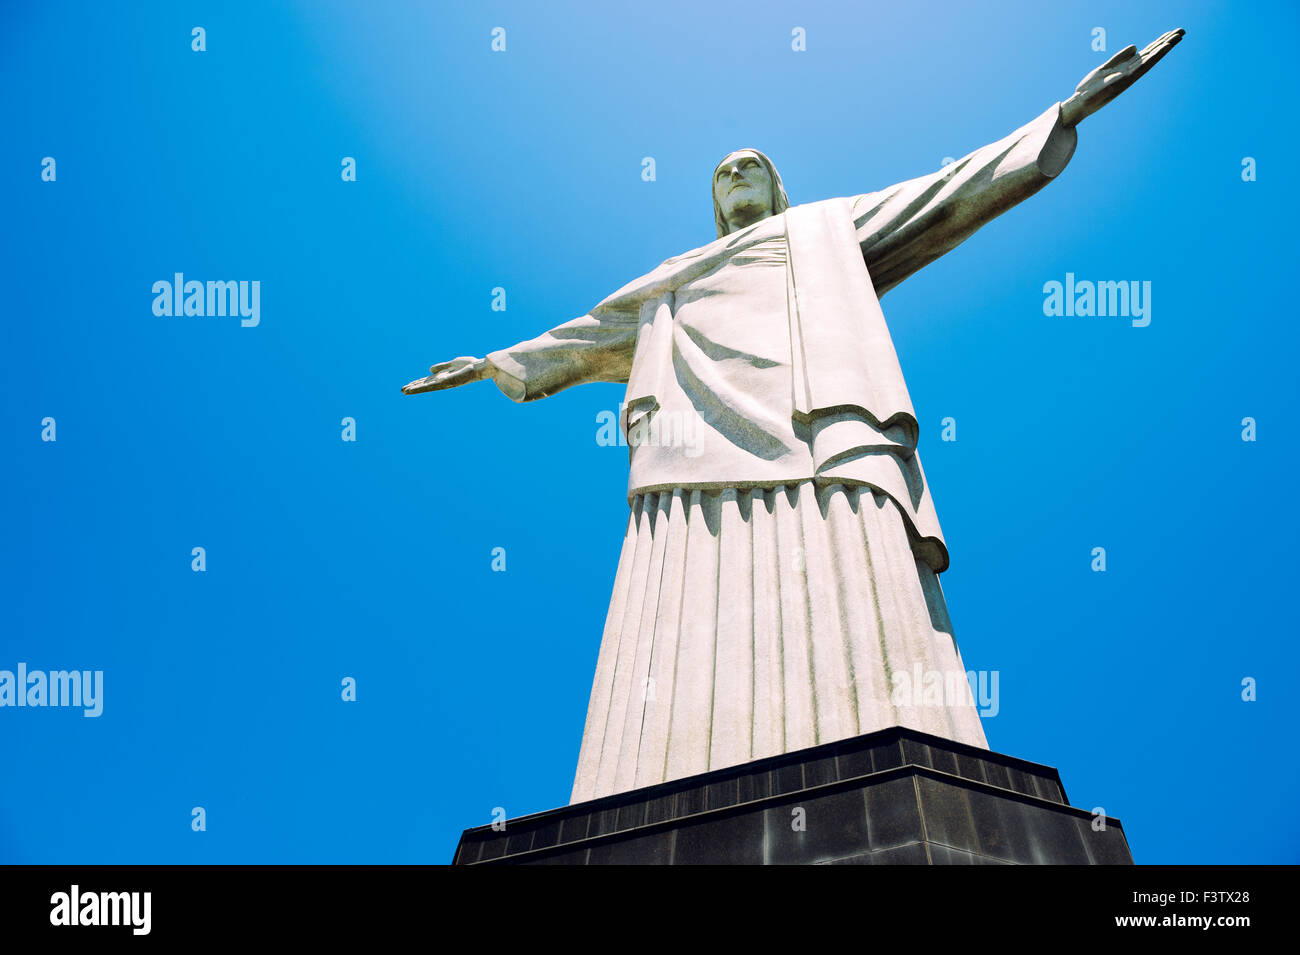 RIO DE JANEIRO, BRAZIL - OCTOBER 20, 2013: Statue of Christ the Redeemer stands on its base at the top of Corcovado Mountain. Stock Photo